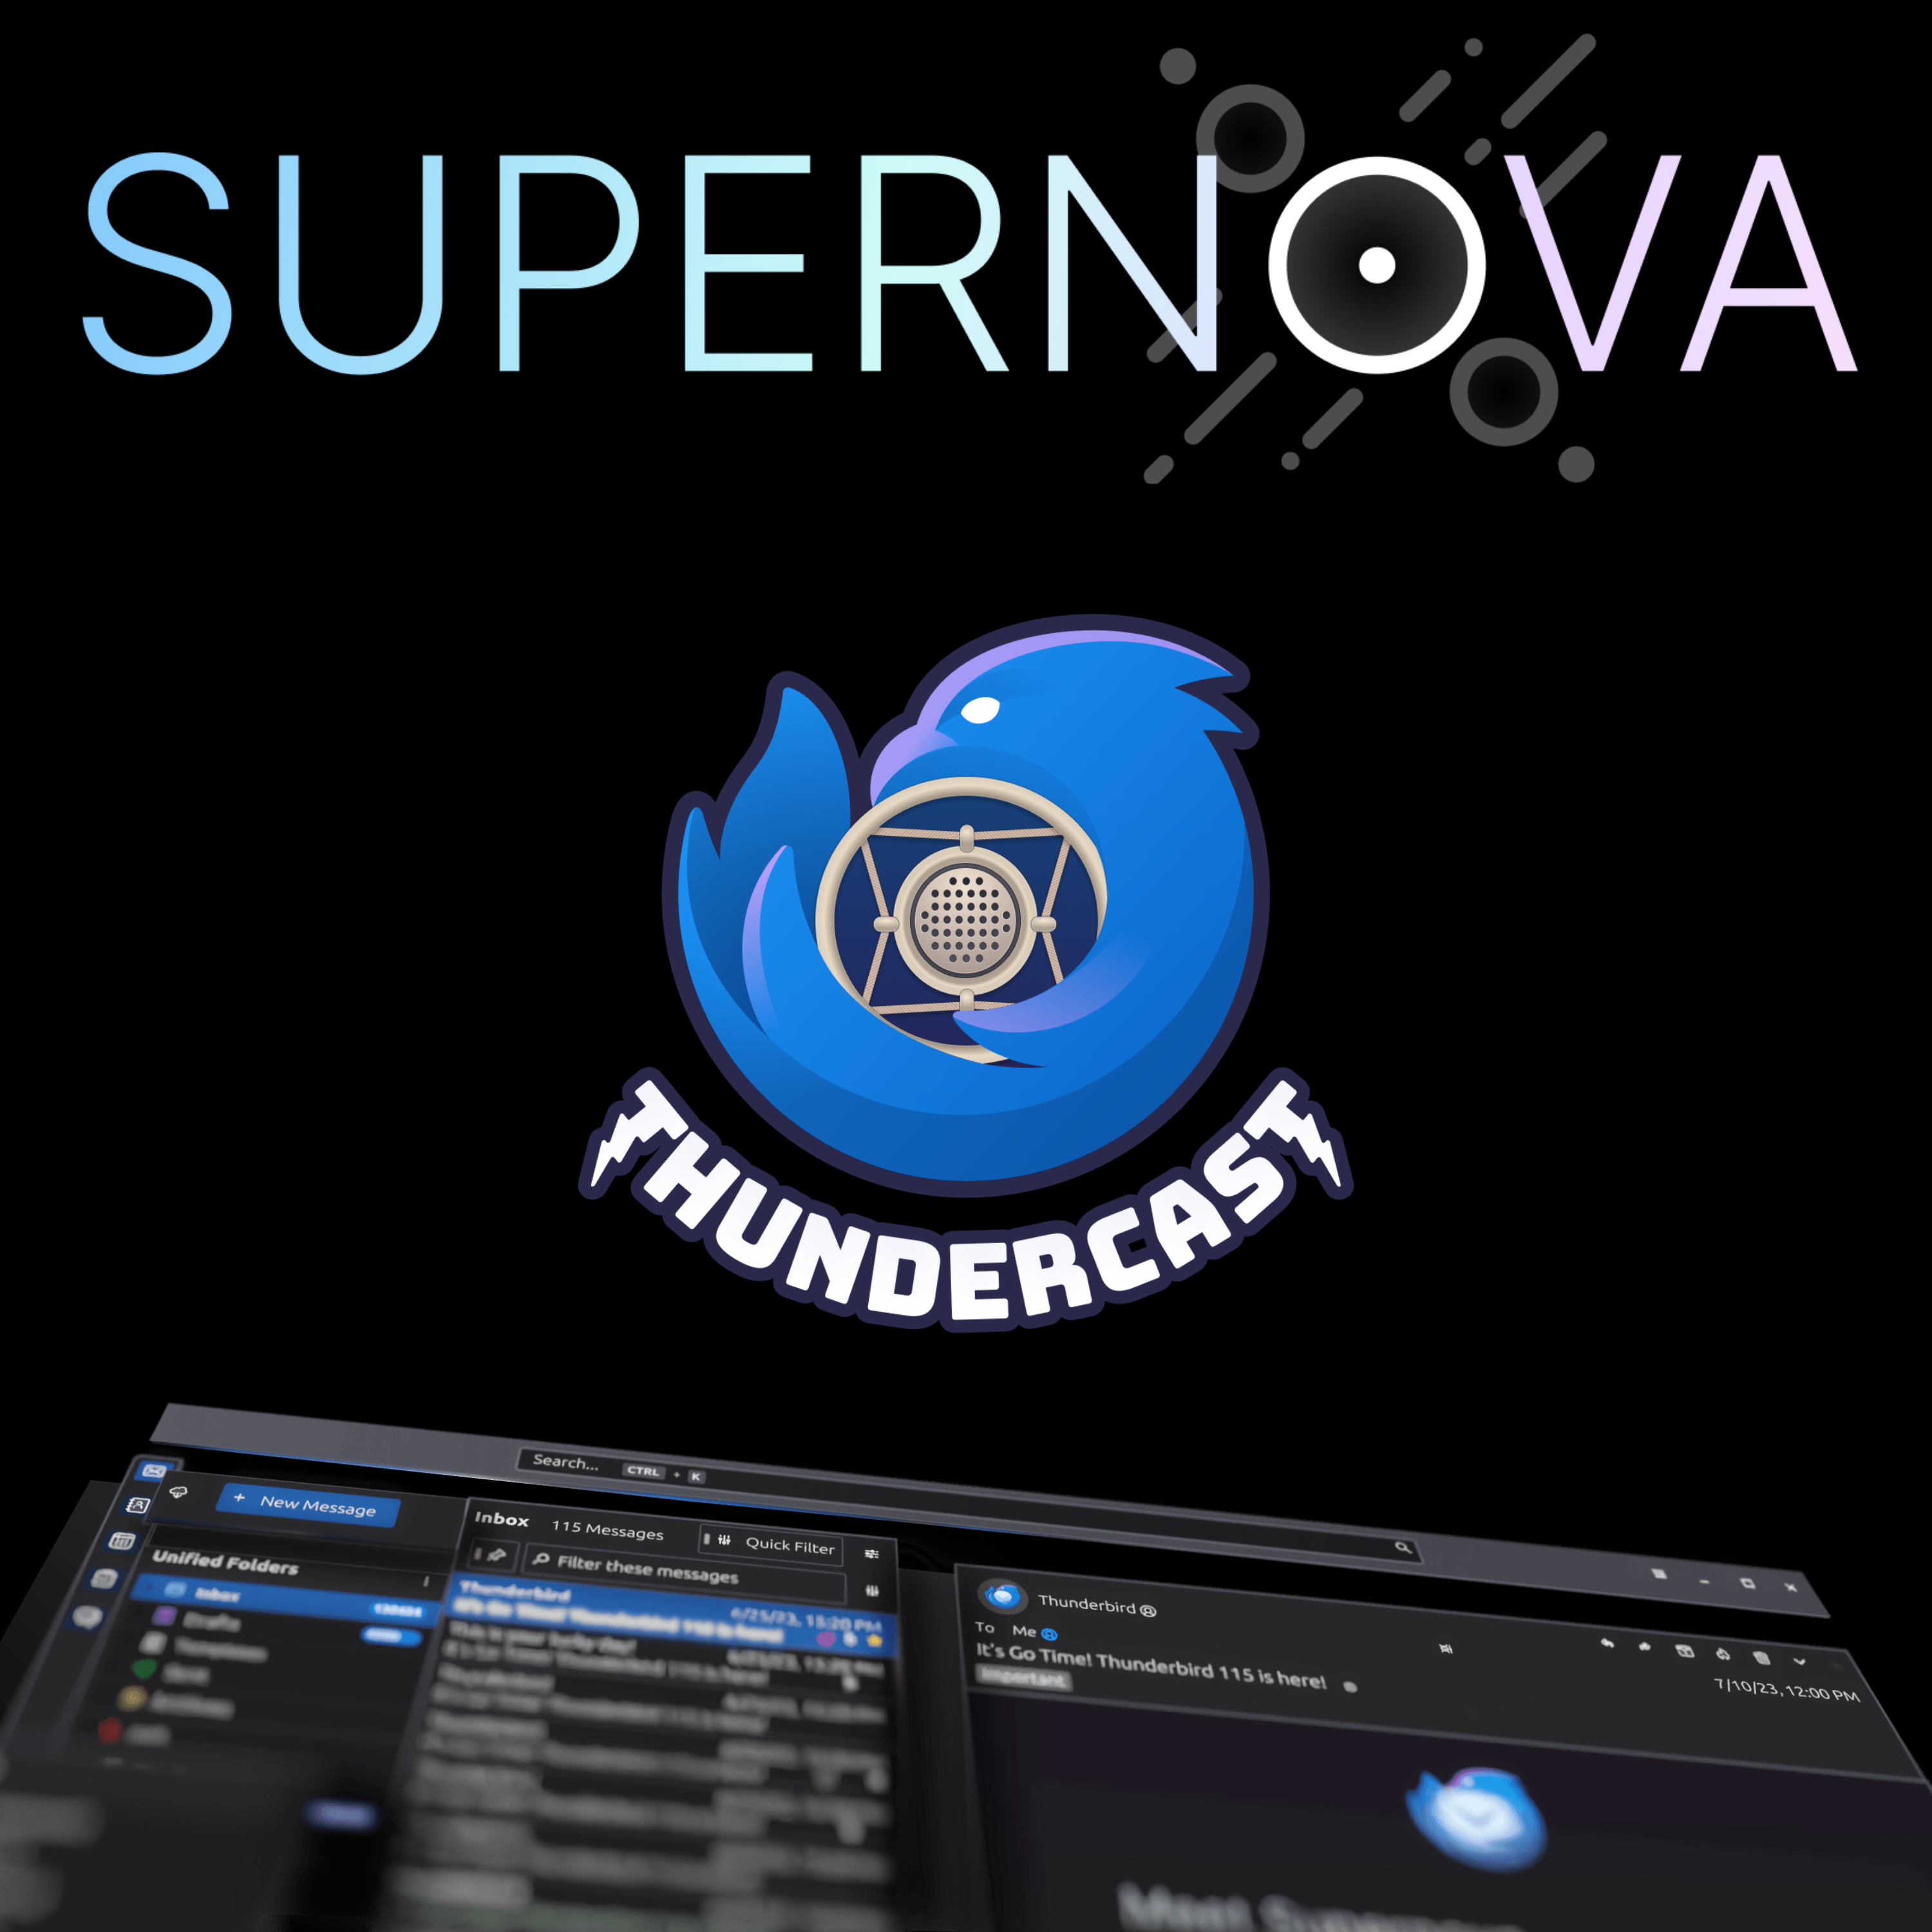 A stylized podcast episode thumbnail, showing the word "SUPERNOVA' above the ThunderCast logo. Underneath is a preview of the Thunderbird application in dark mode.